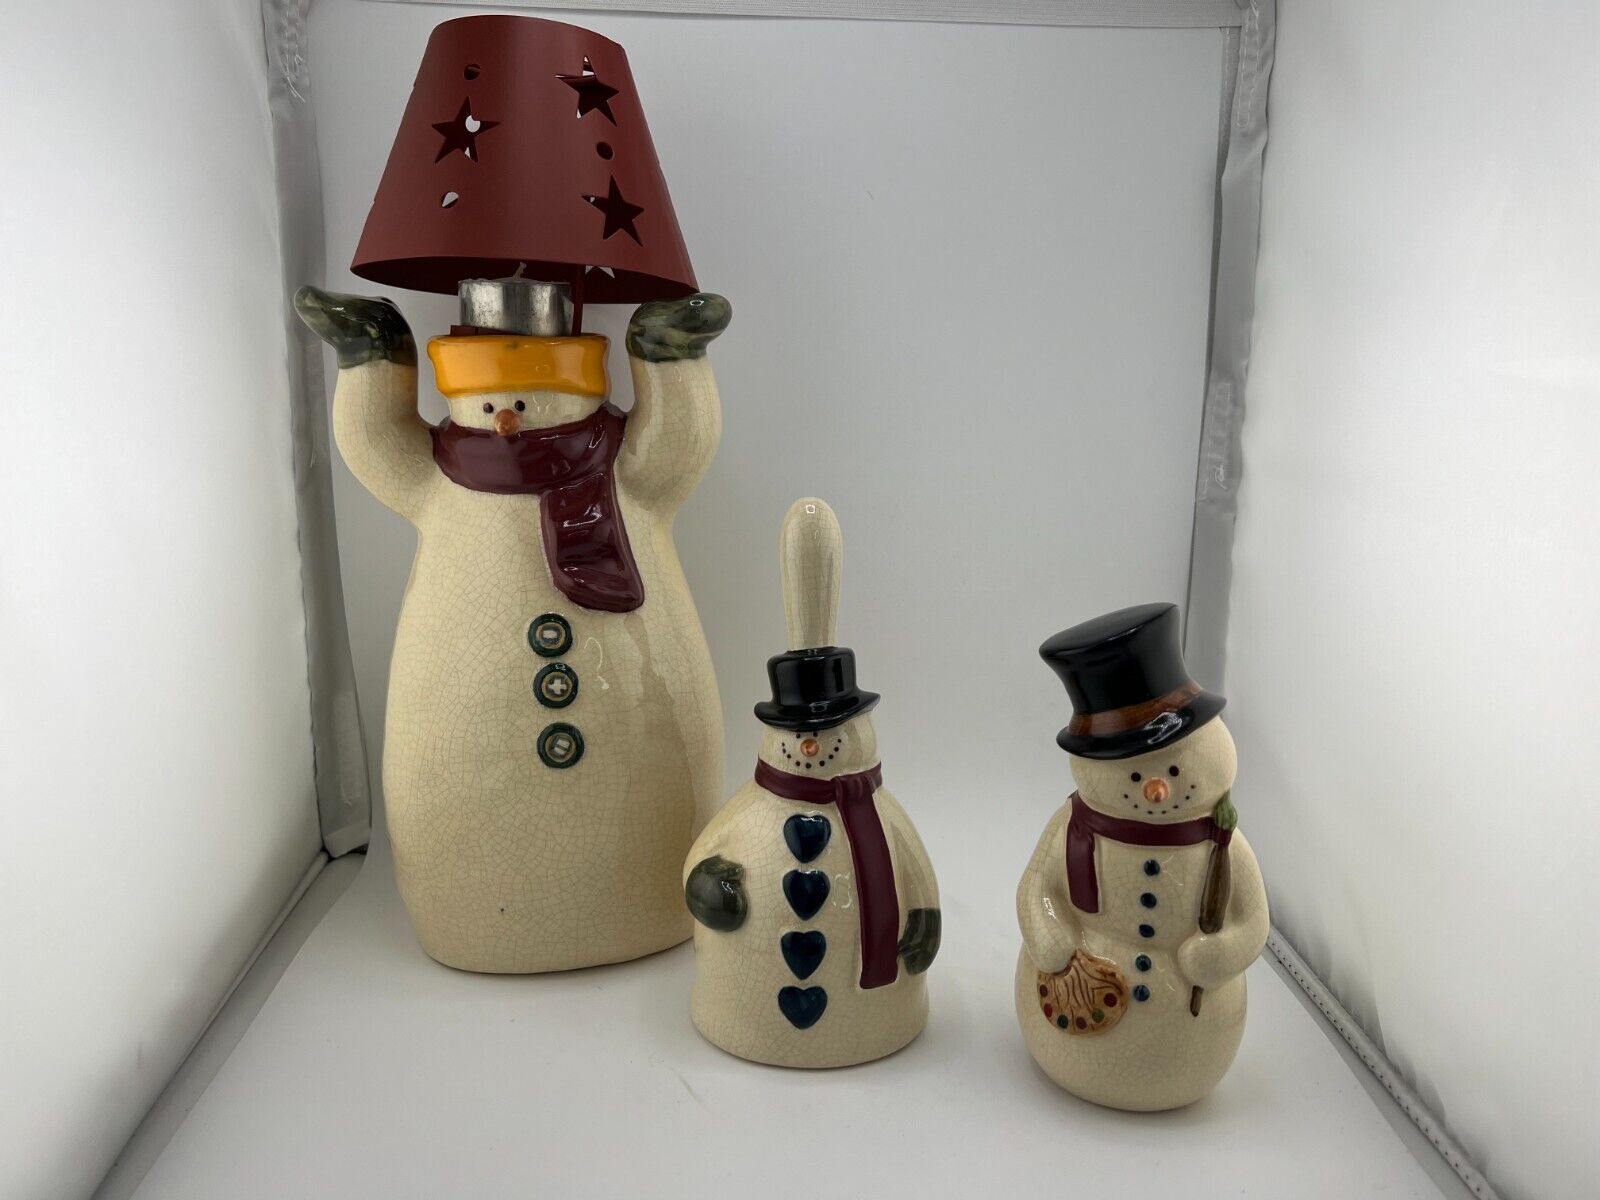 Russ Berrie and Co. Ceramic Snowman Painter, Tealight Candle Holder & Bell - Lot